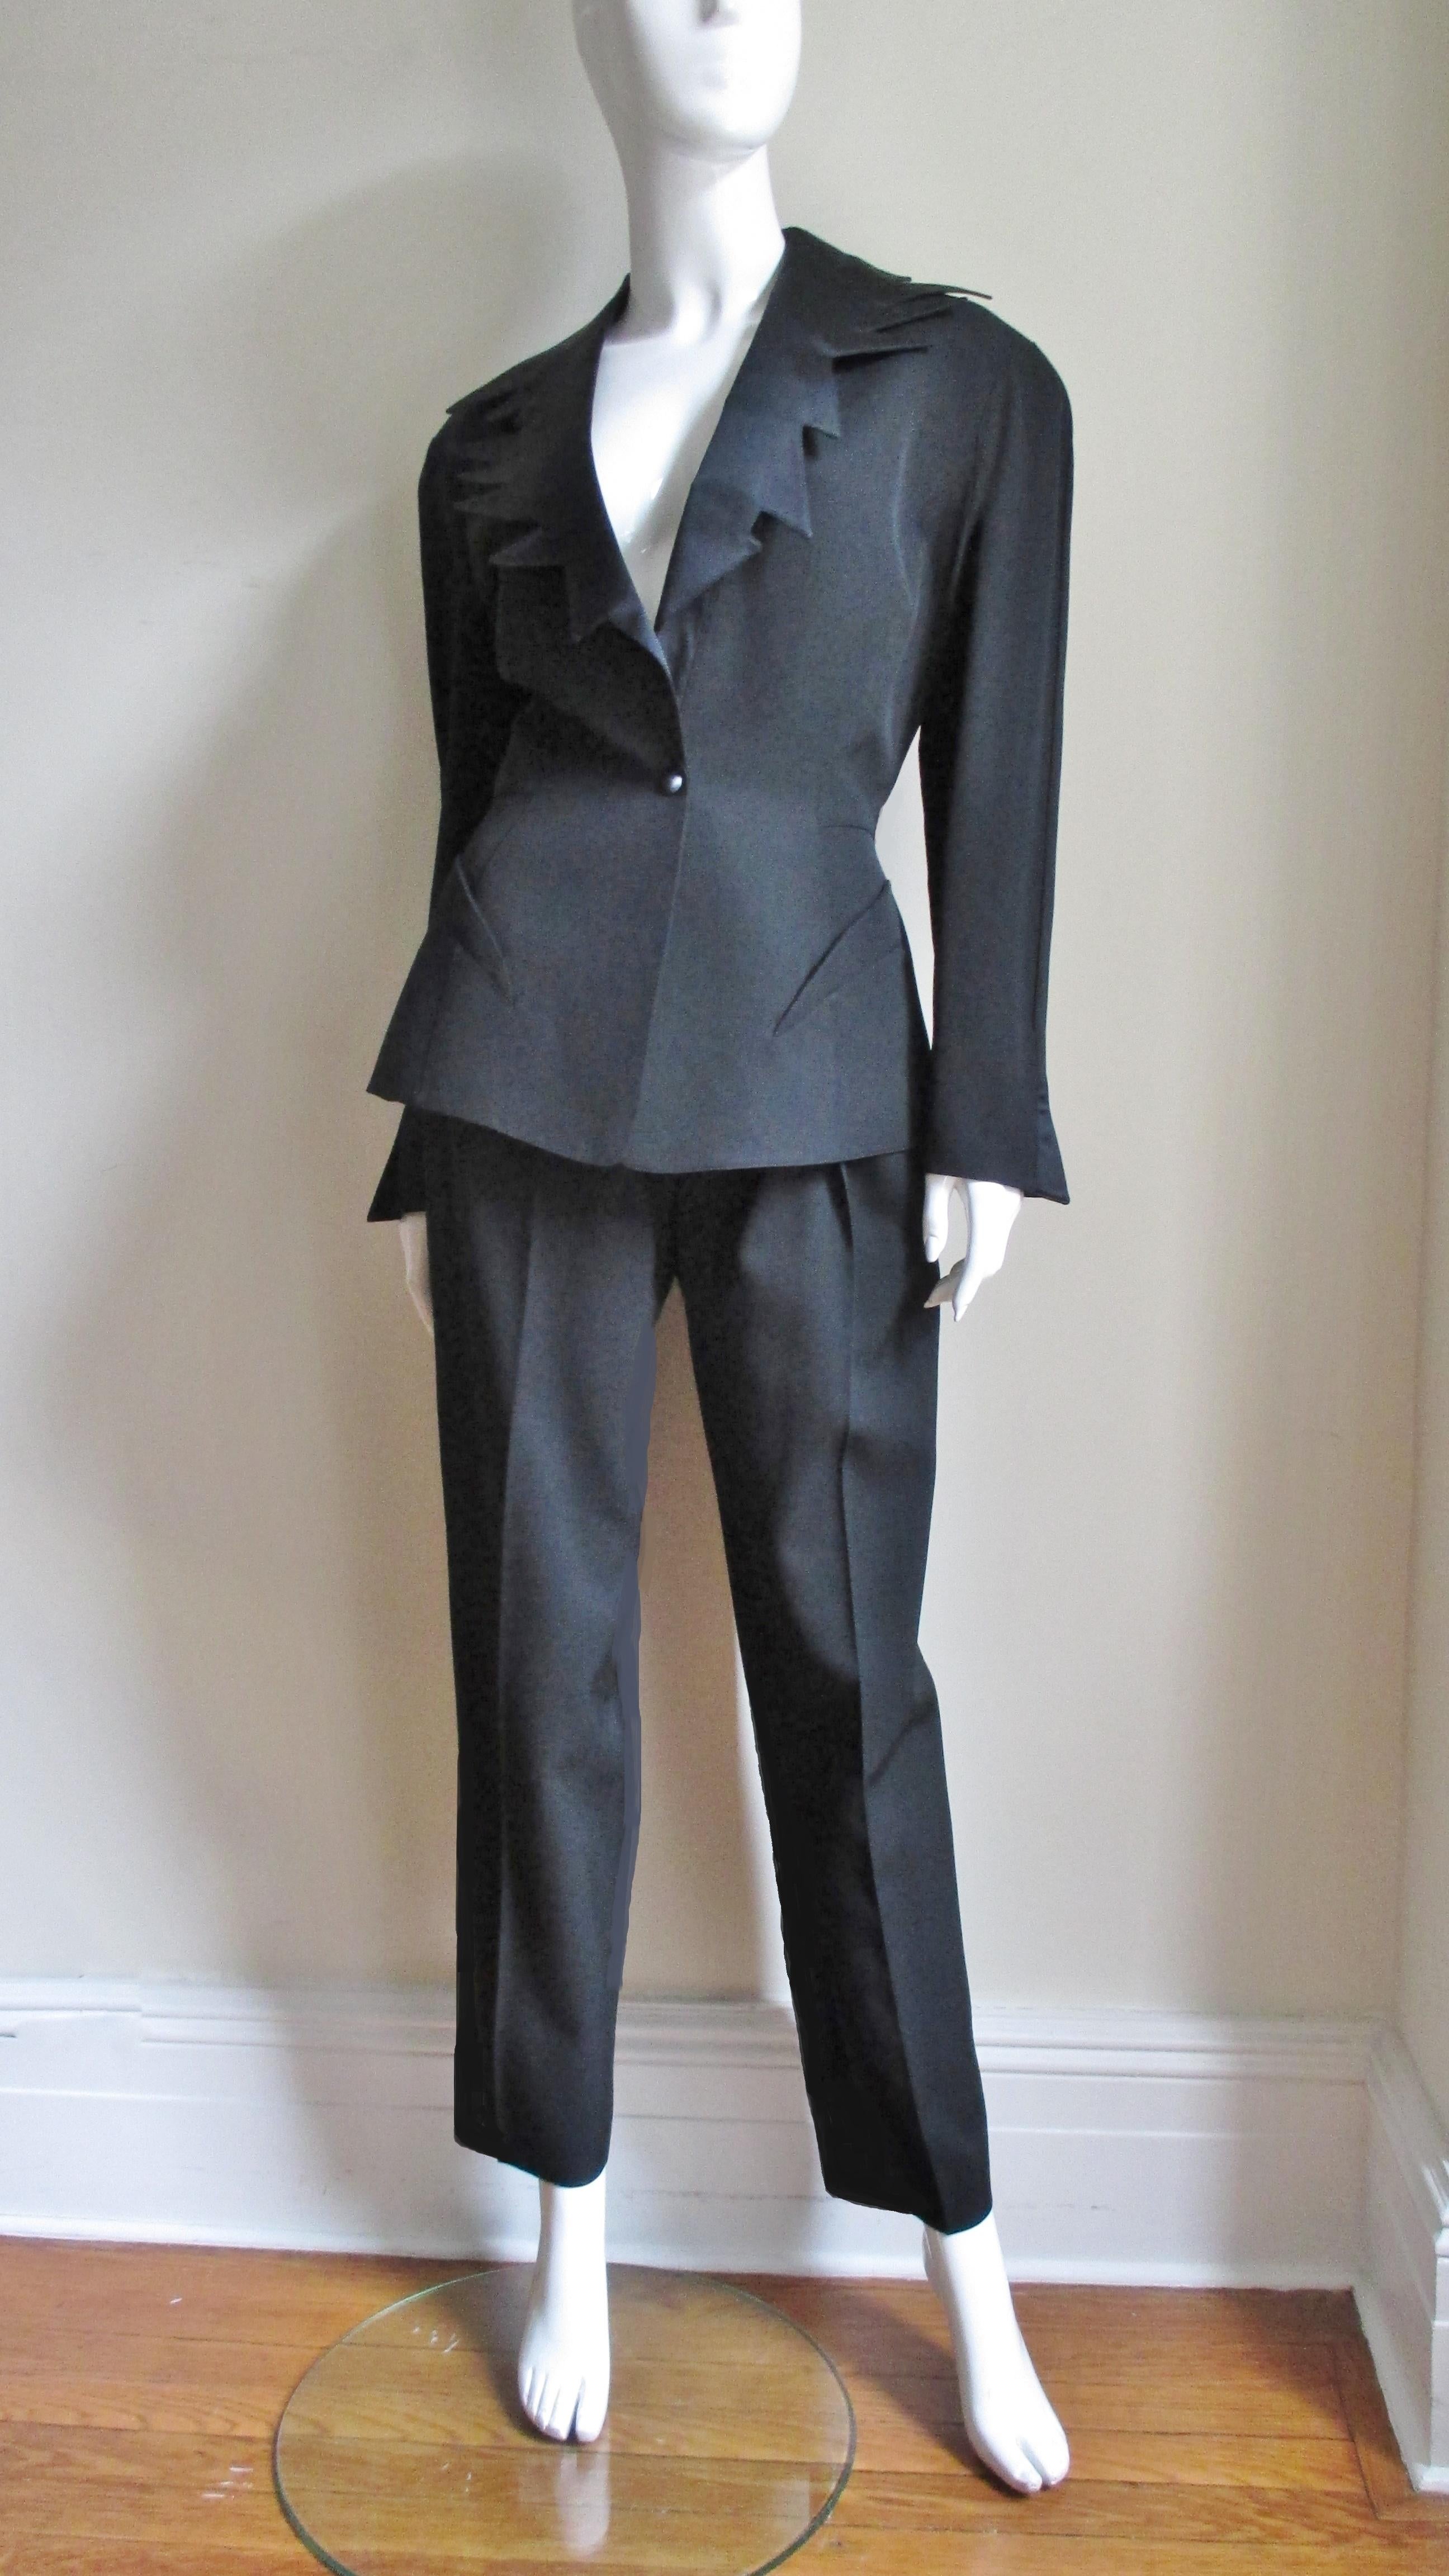 A fabulous 2 piece tuxedo from Thierry Mugler.  The jacket is incredible with a zig zag edged silk satin collar plus the signature fitted waist and seaming Mugler is known for.  It has curved front pockets, flared slit cuffs, shoulder pads and 1